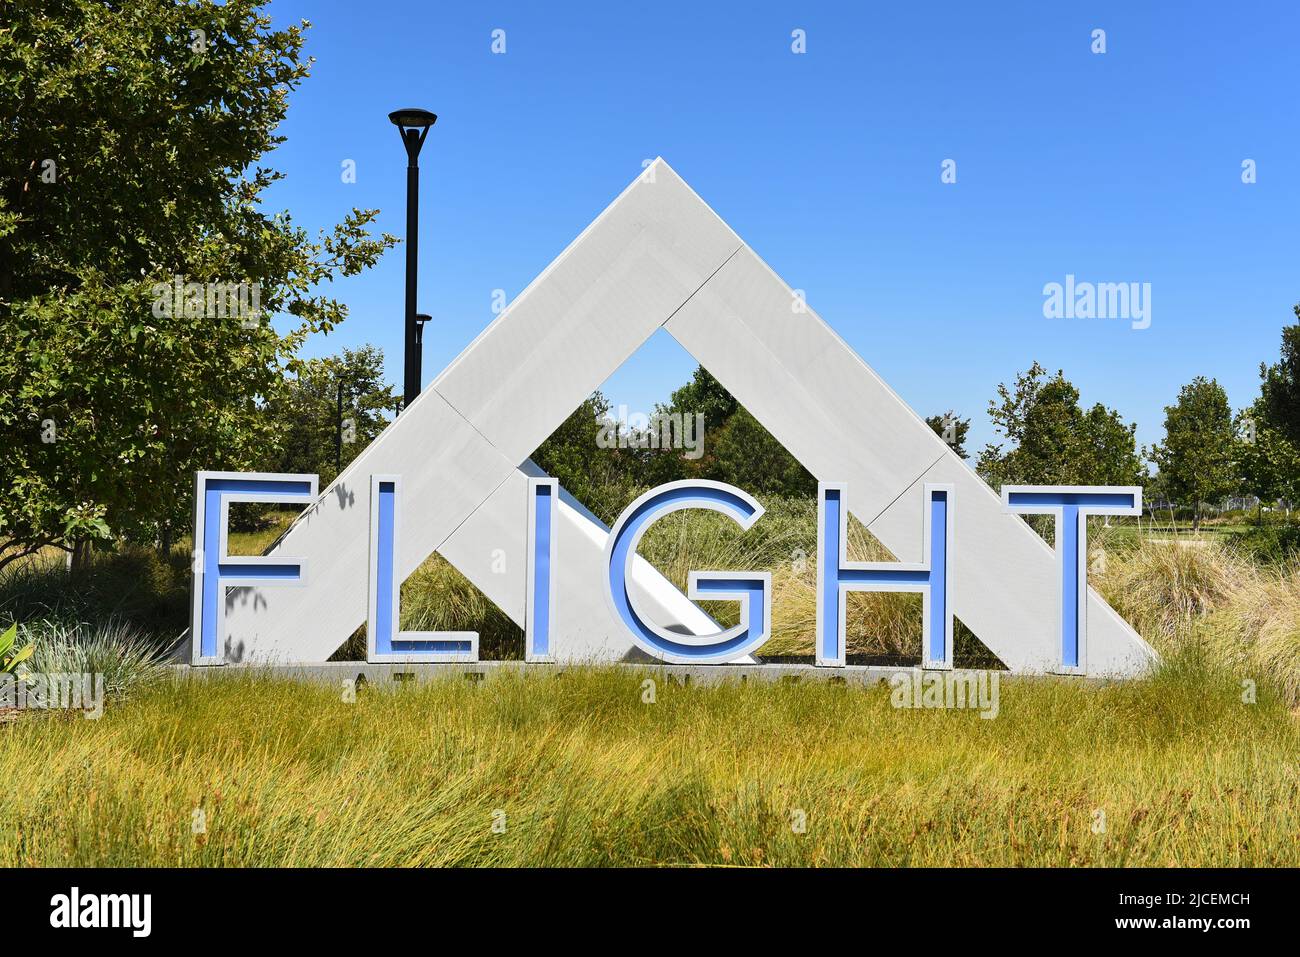 TUSTIN, CALIFORNIA - 12 JUN 2022: Flight sign at the east entrance to the Business Park at Tustin Legacy. Stock Photo